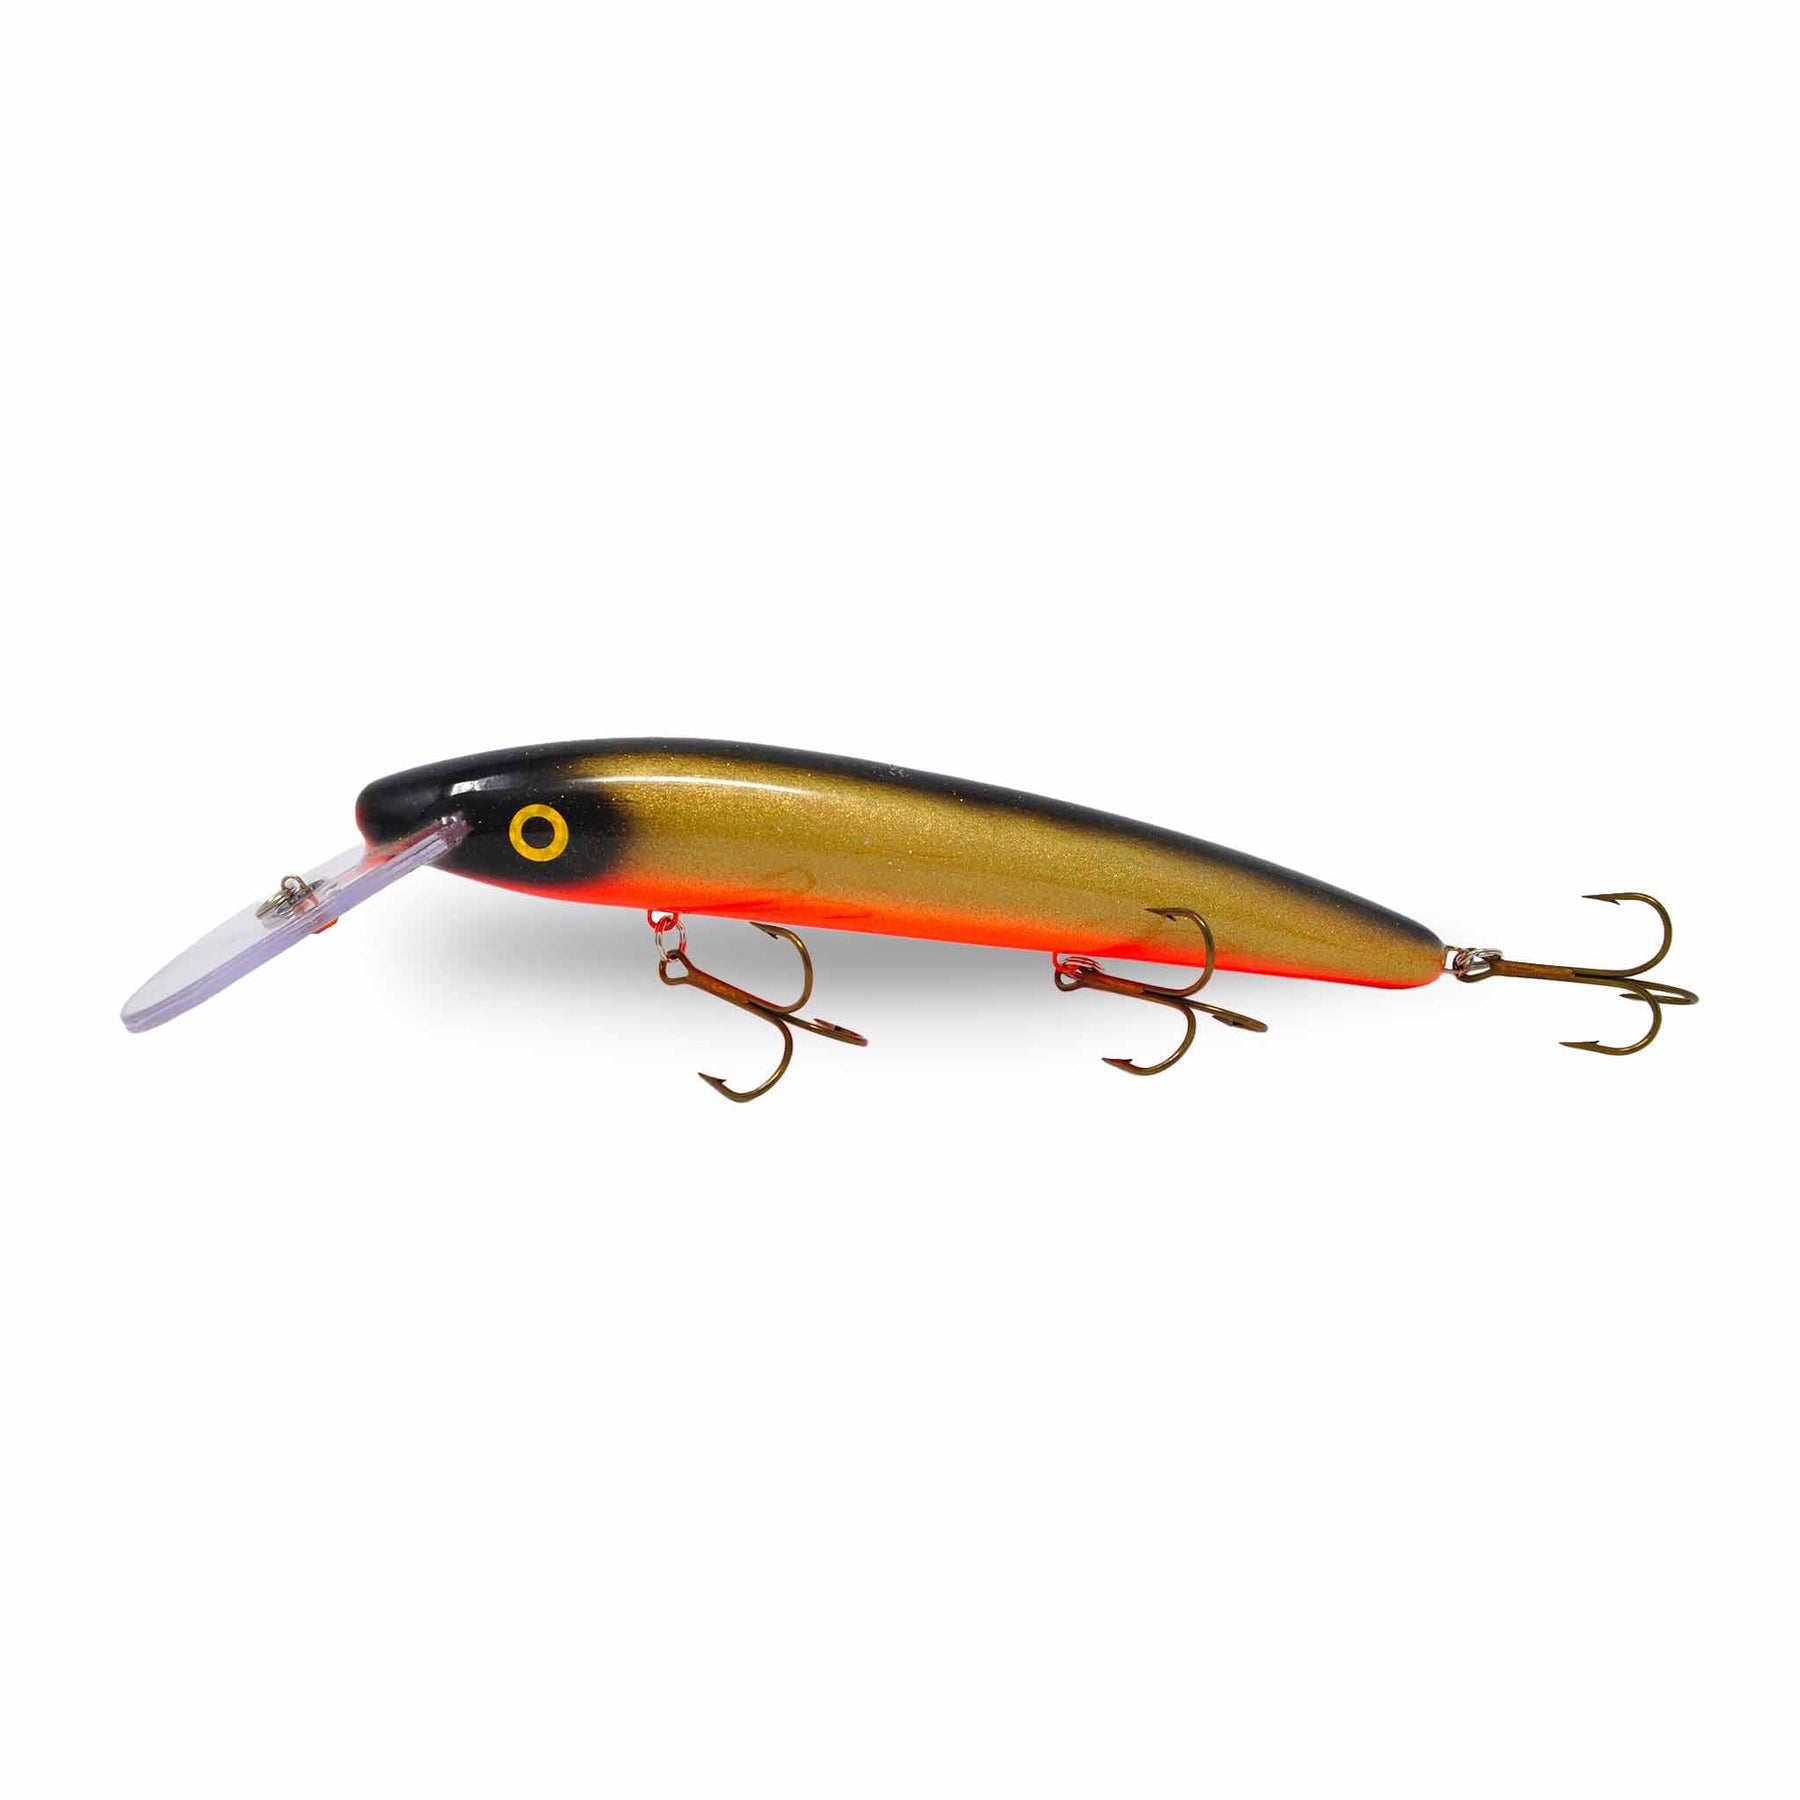 View of Crankbaits Slammer 10" Deep Minnow Crankbait Golden Shiner available at EZOKO Pike and Musky Shop